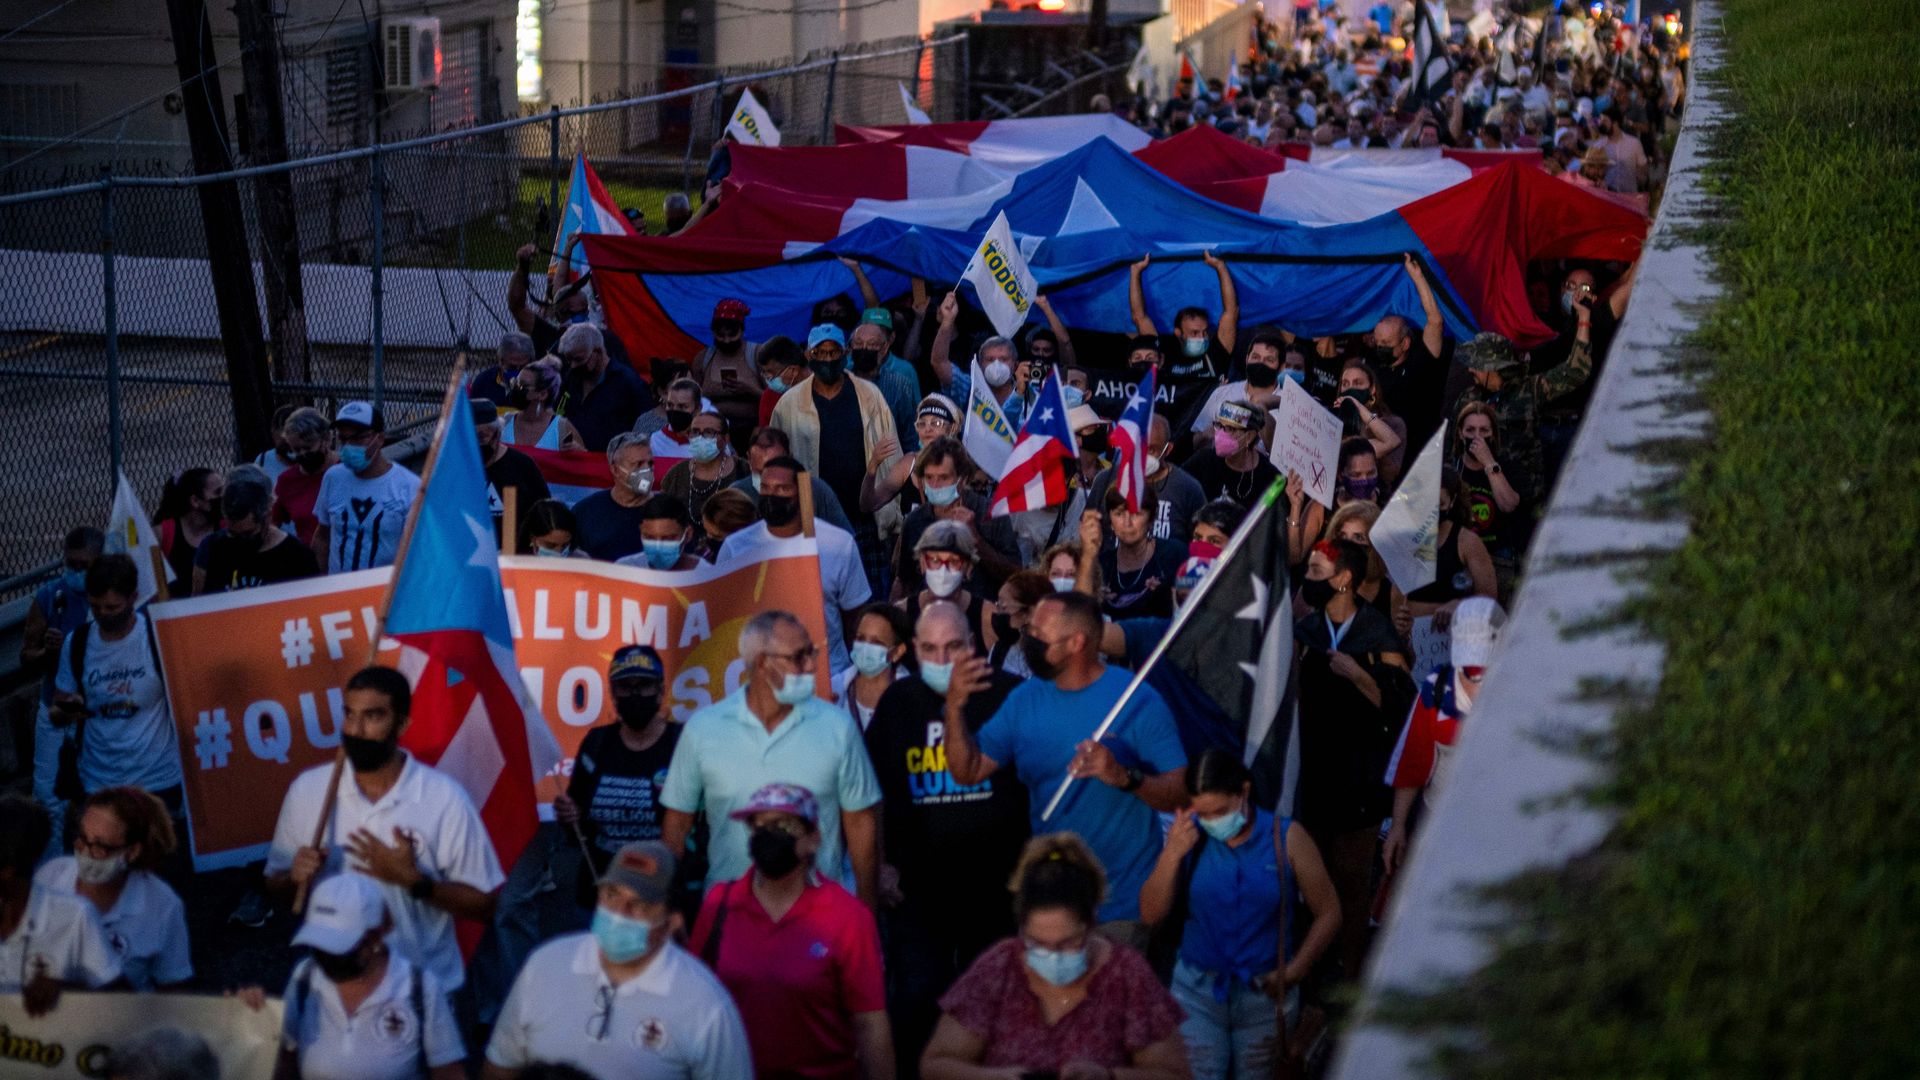 People march along Las Americas Highway to demand the expulsion of power company Luma amid a continued lack of electricity across the island, in San Juan, Puerto Rico on October 15, 2021.